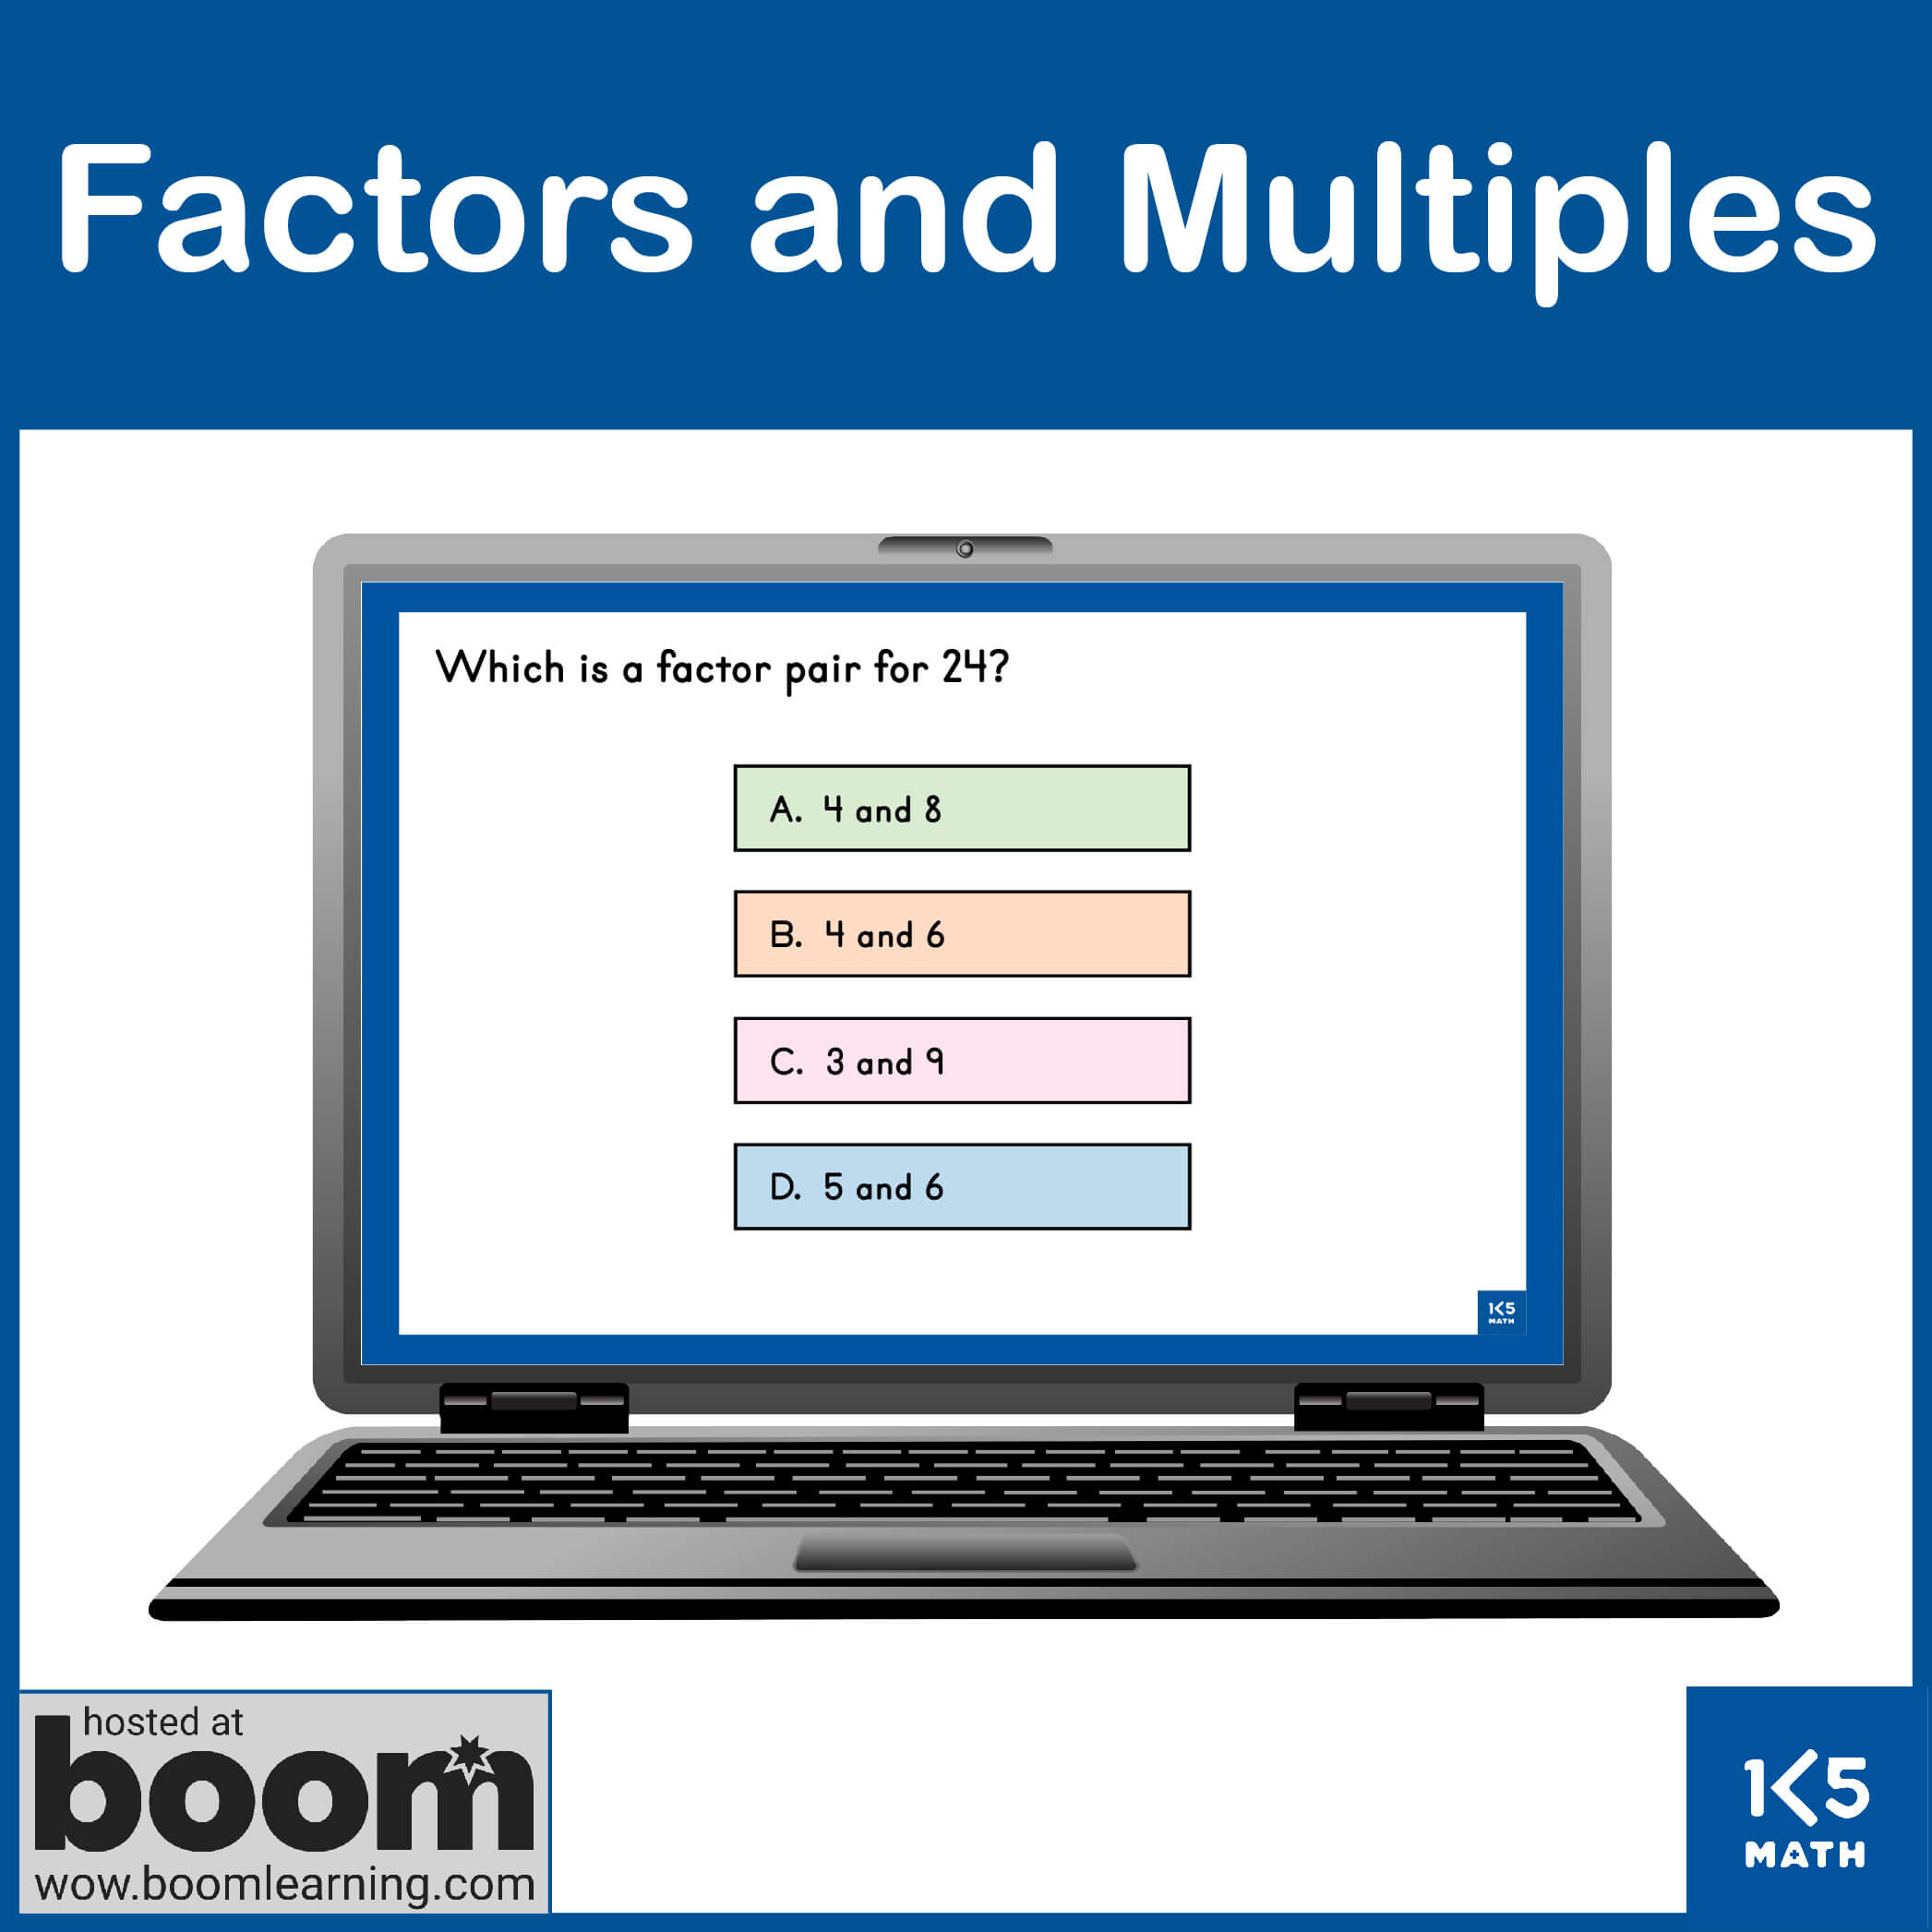 Boom Cards: Factors and Multiples